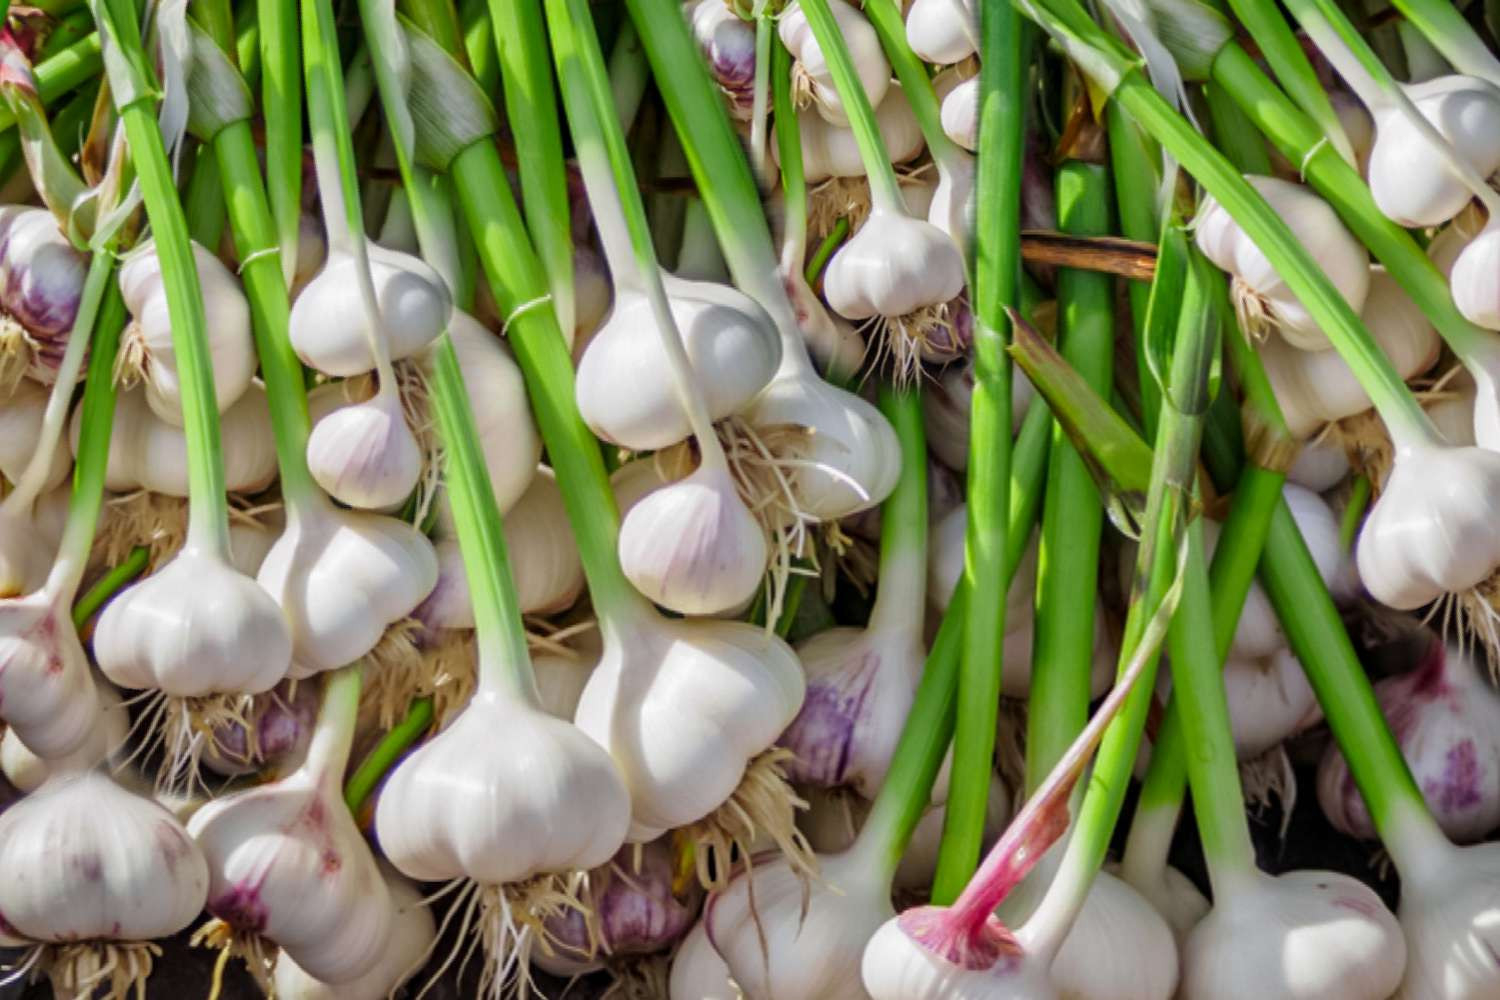 Garlic: How To Plant, Grow, And Care For Garlic